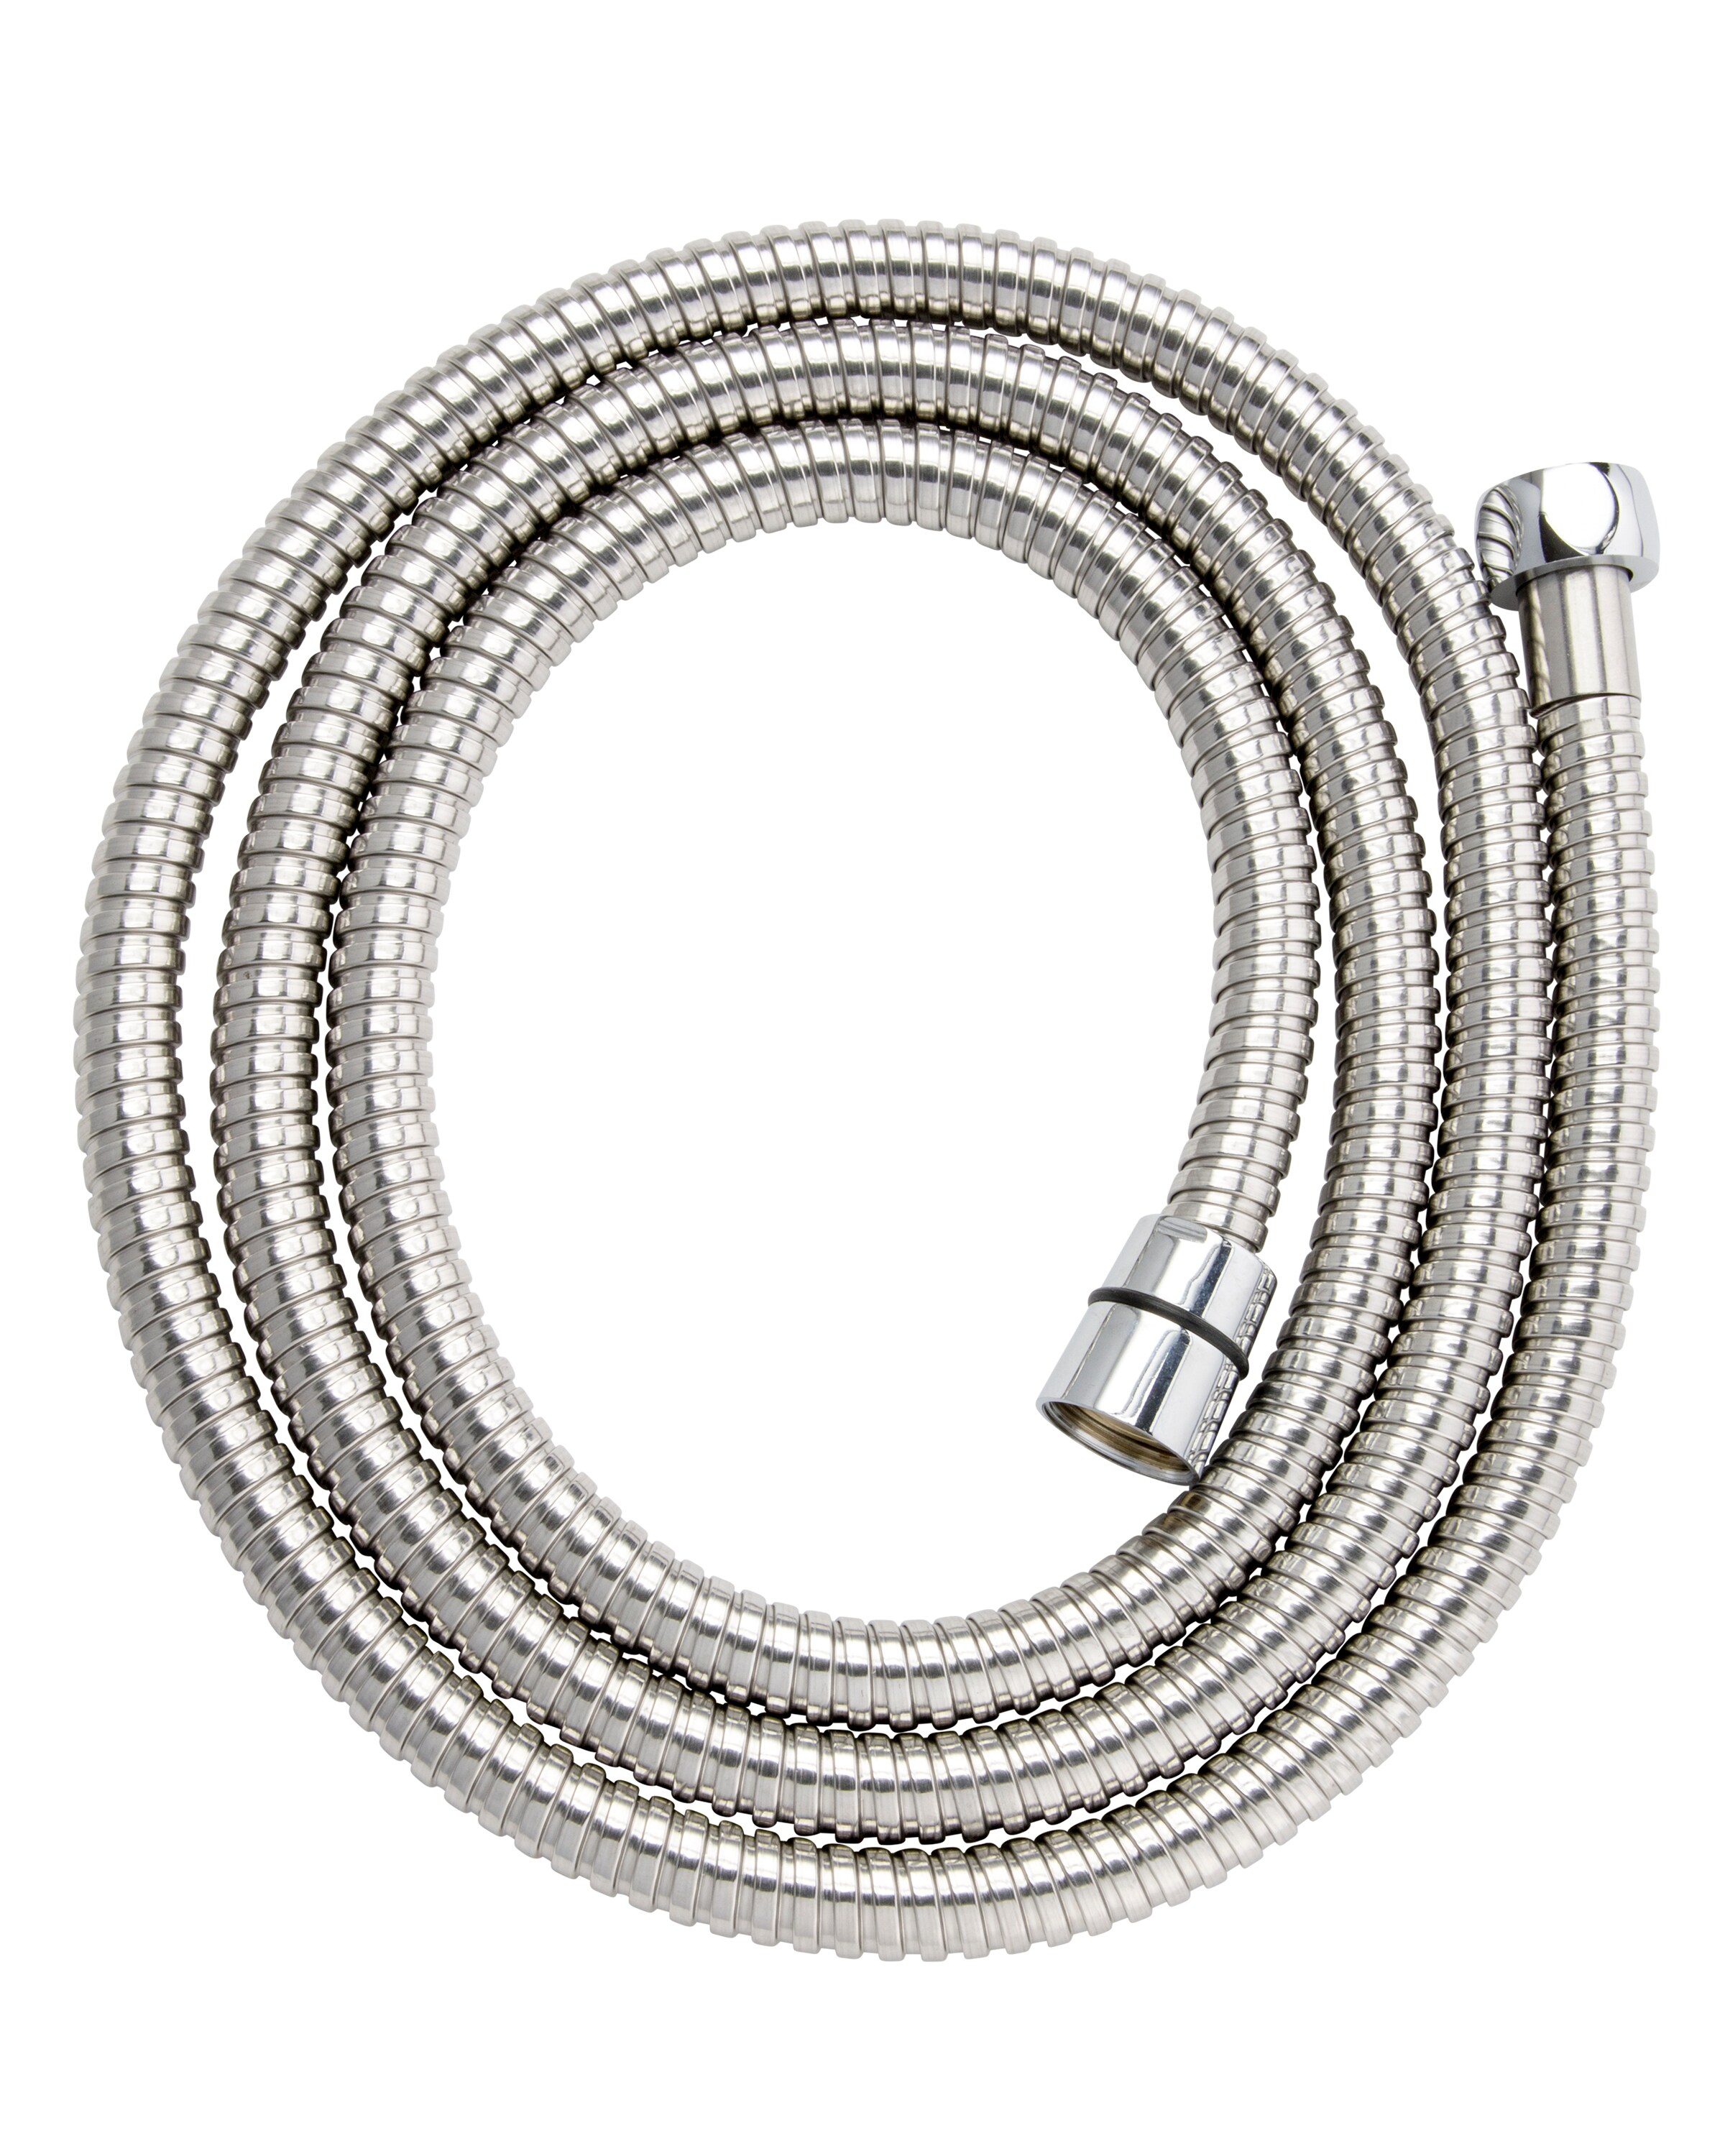 Polished Chrome Details about   ComfortHome 79 inch Stainless Steel Shower Hose Replacement 